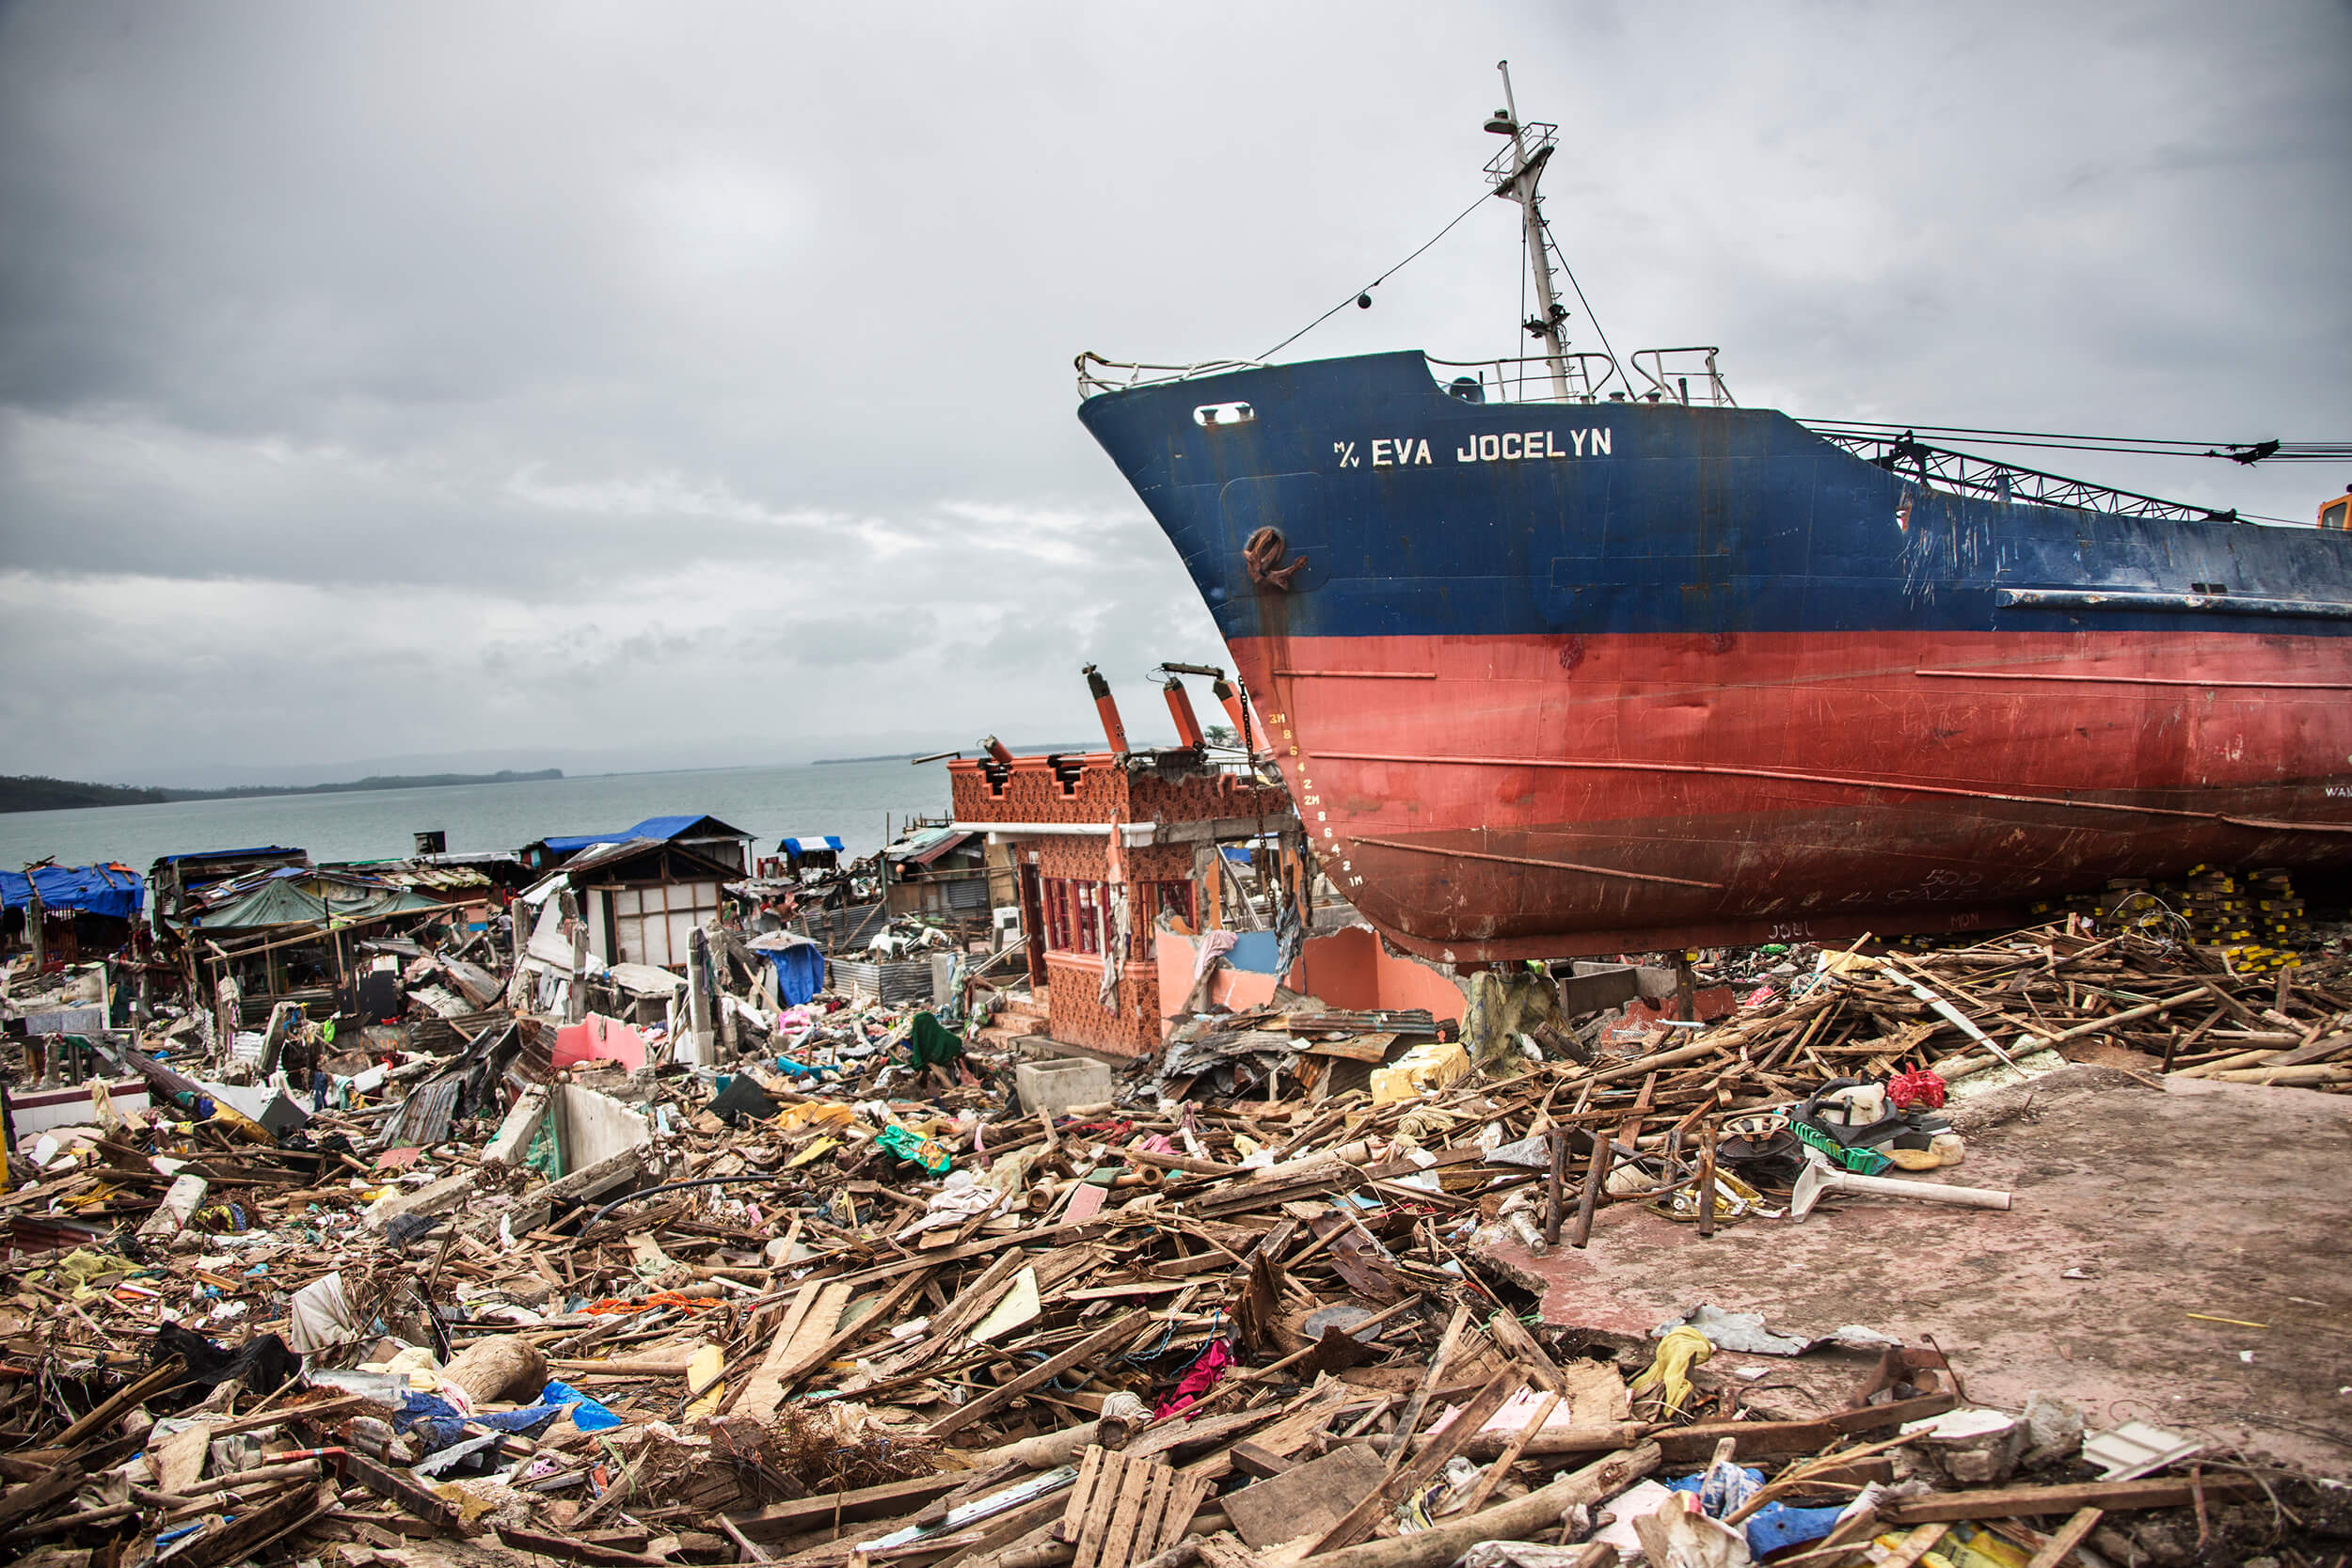  The town of Tacloban on the island of Leyte, after Typhoon Haiyan November 2013. 